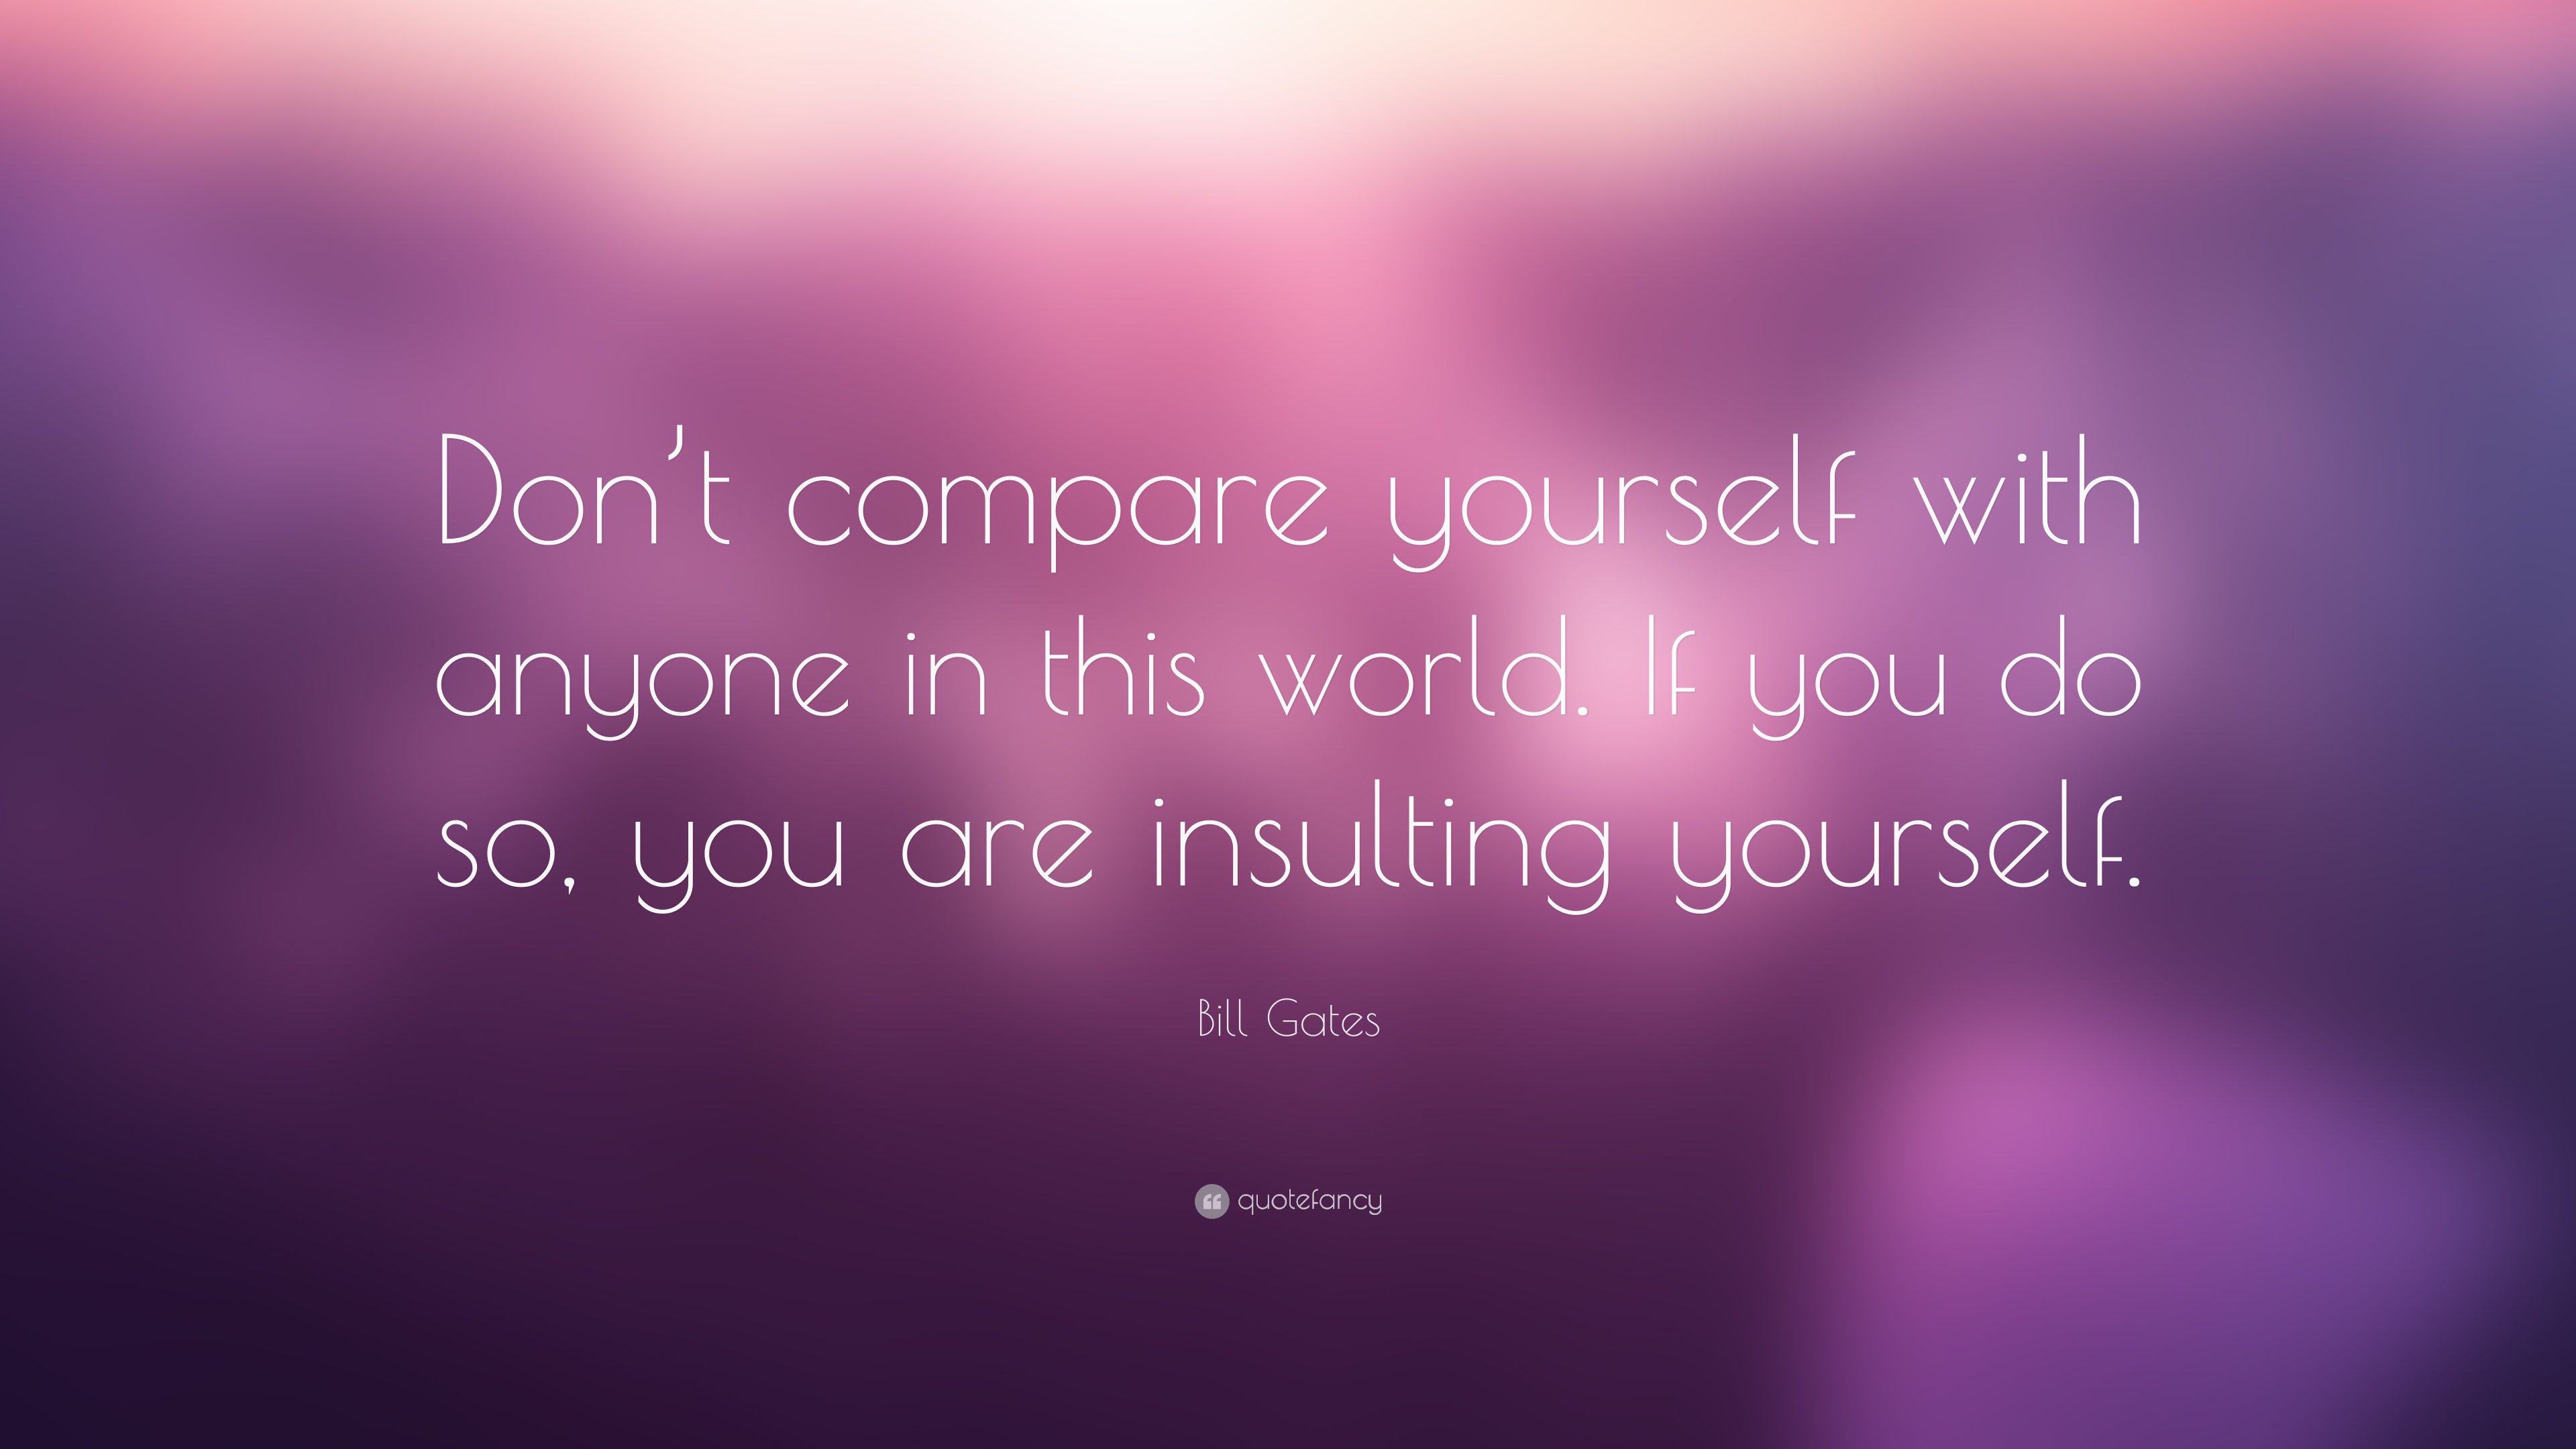 Bill Gates Quote Dont compare yourself with anyone in this